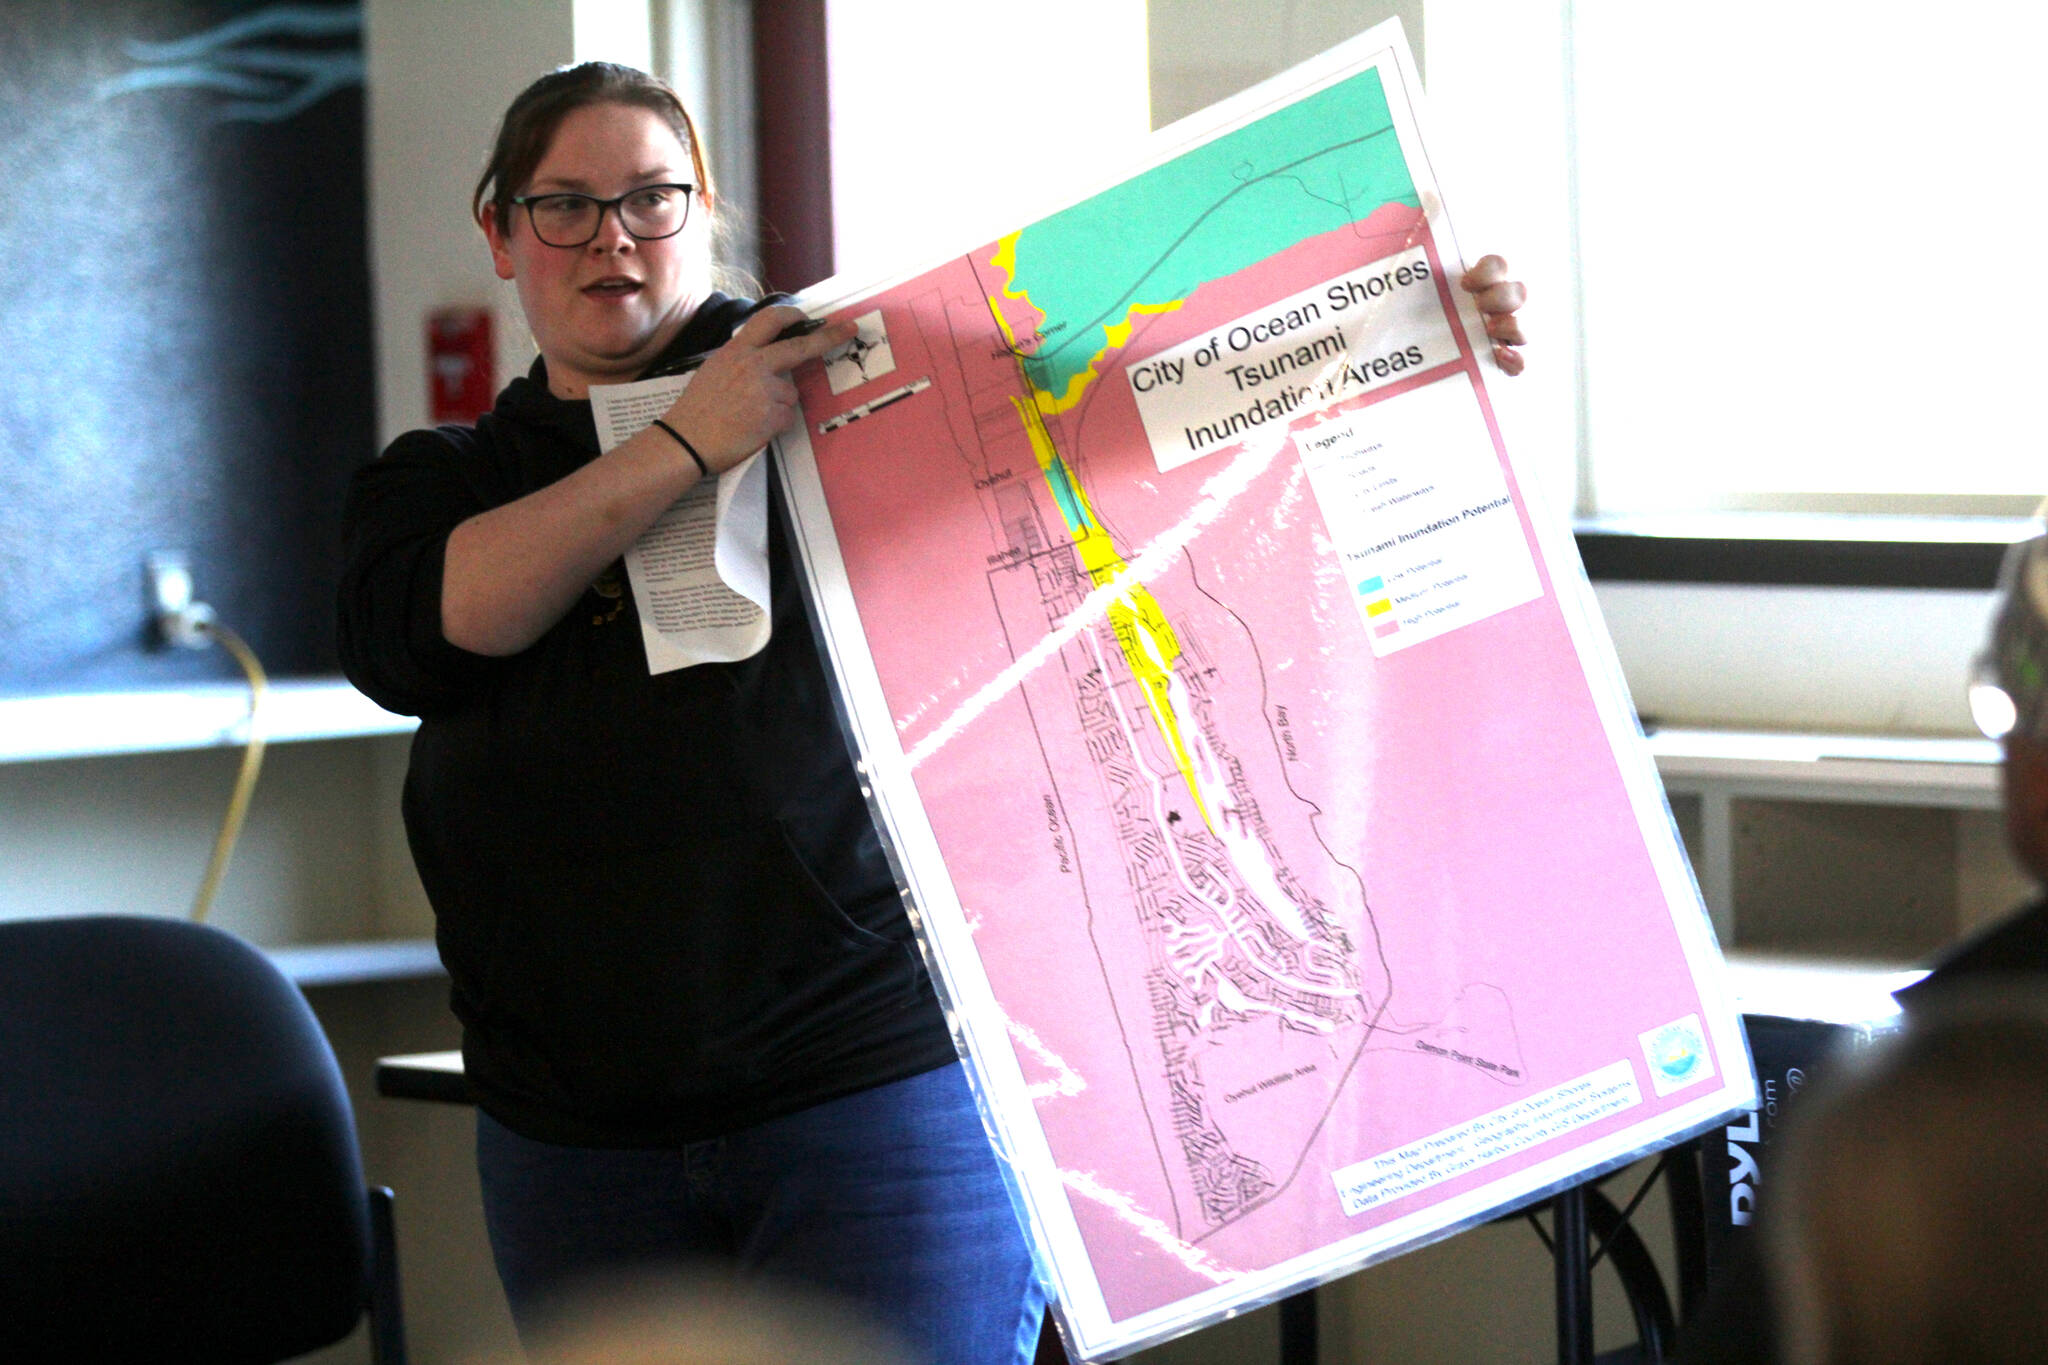 Michael S. Lockett / The Daily World
Ocean Shores Elementary School teacher Haley Stoney holds the inundation map of Ocean Shores during a school board meeting on March 21. The construction of a tsunami tower for the low-lying school has proved contentious with the public.